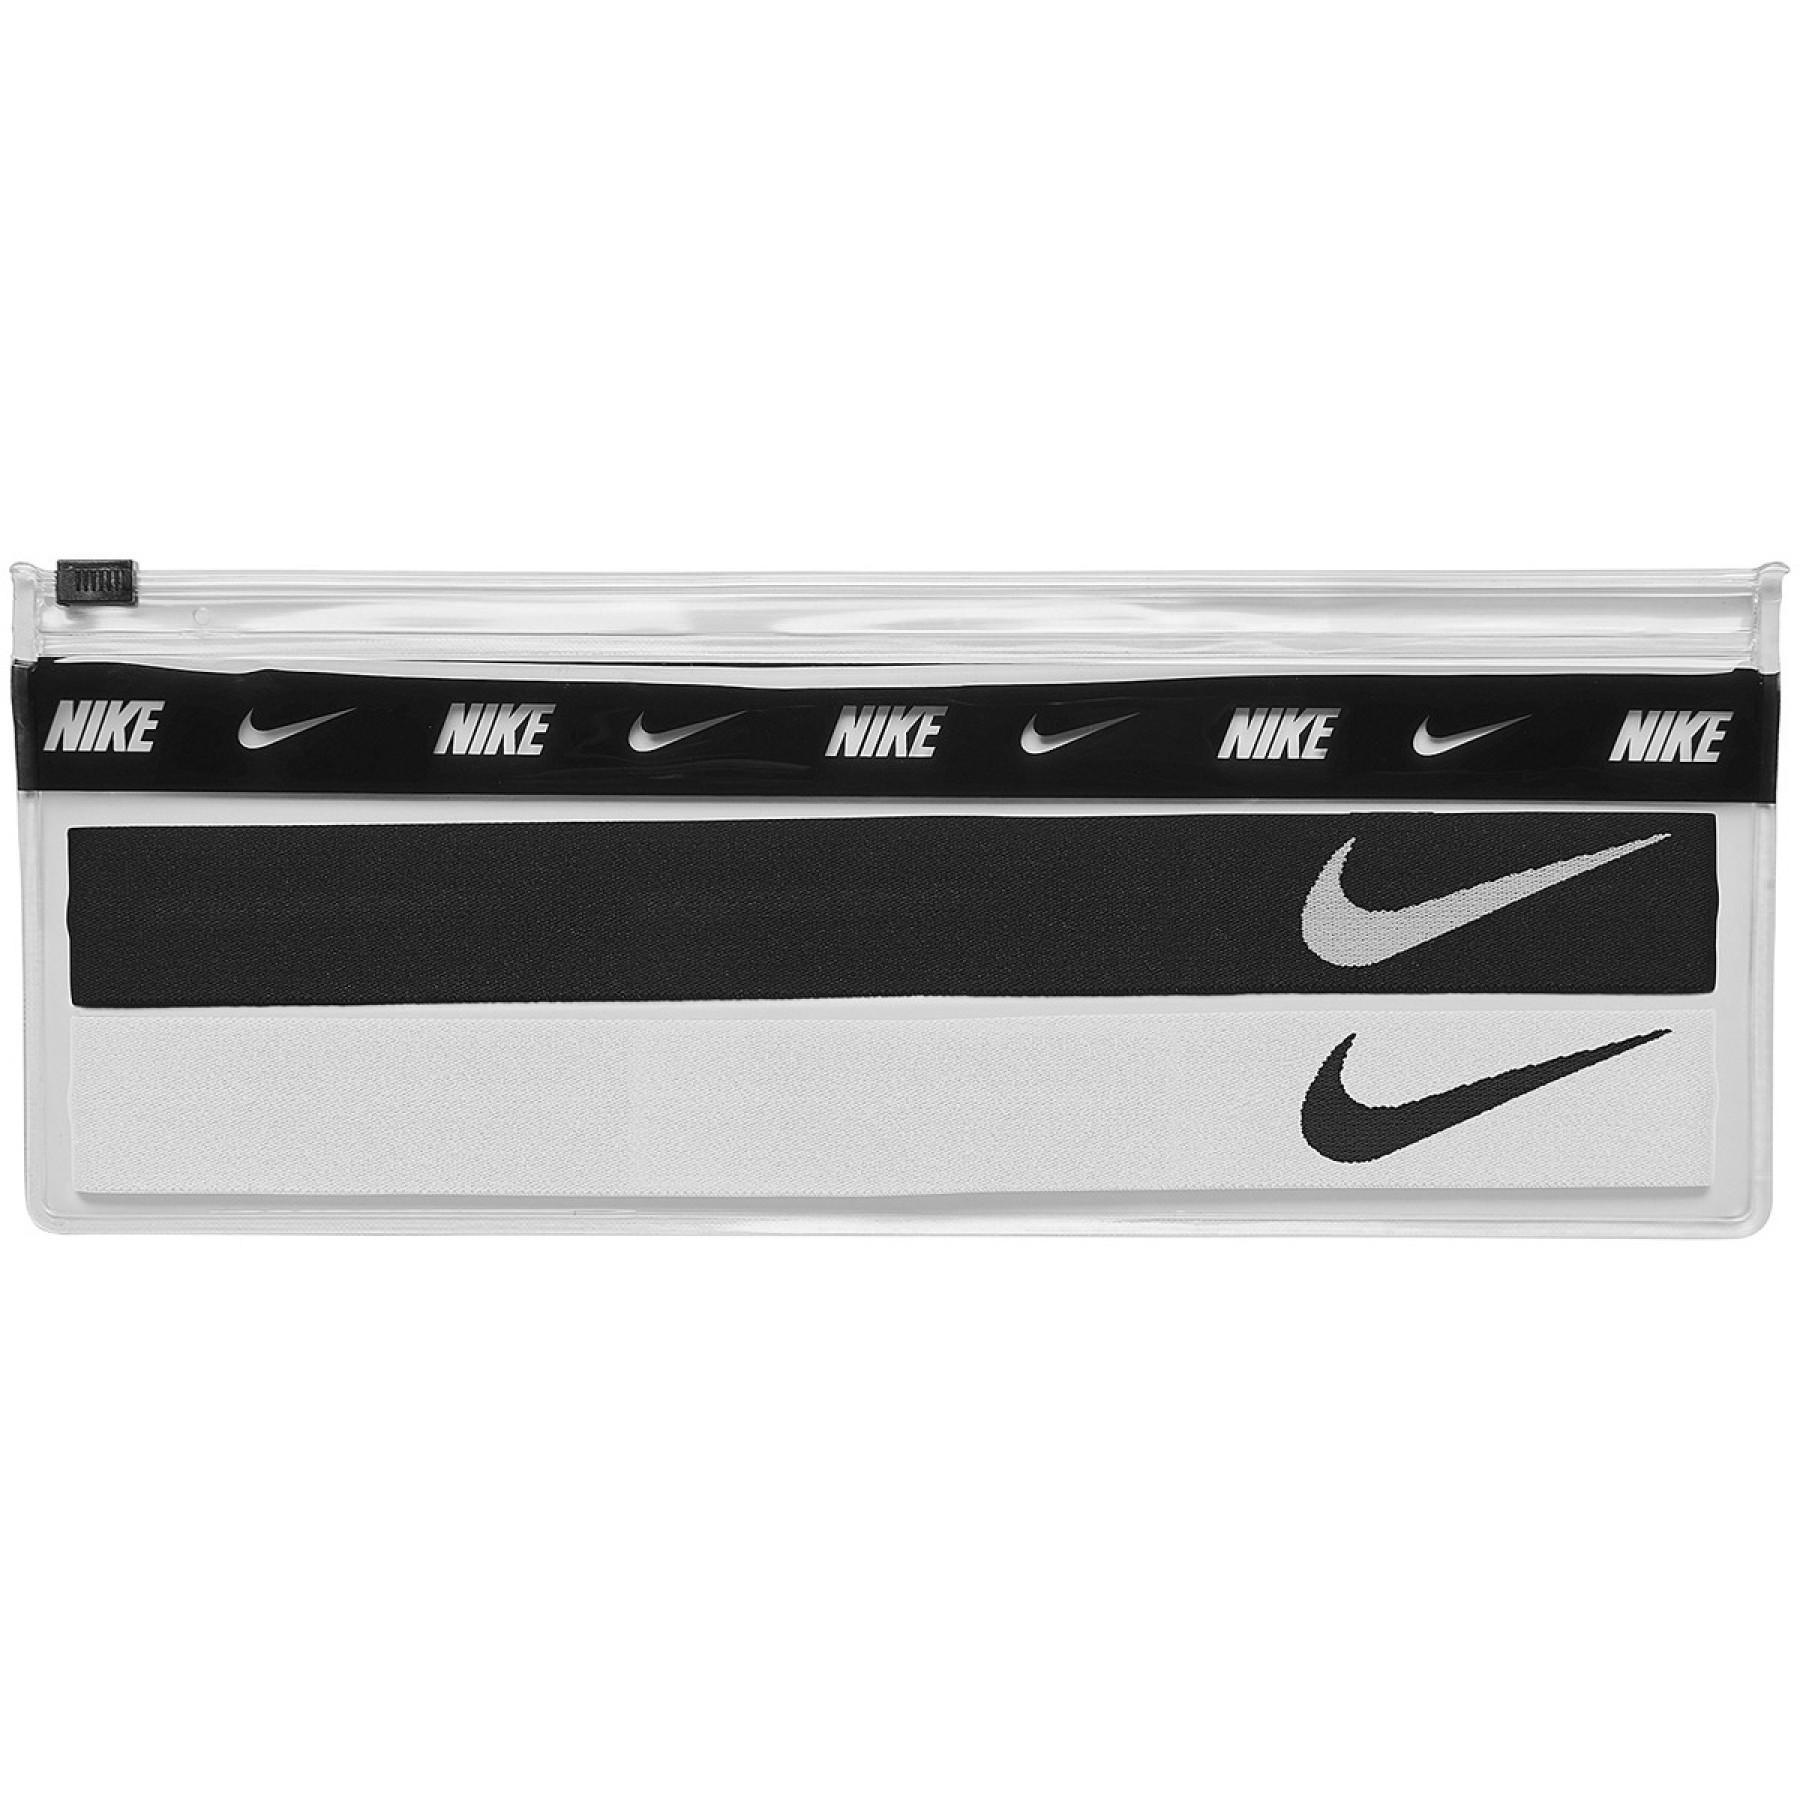 Pack of 2 Nike rubber bands